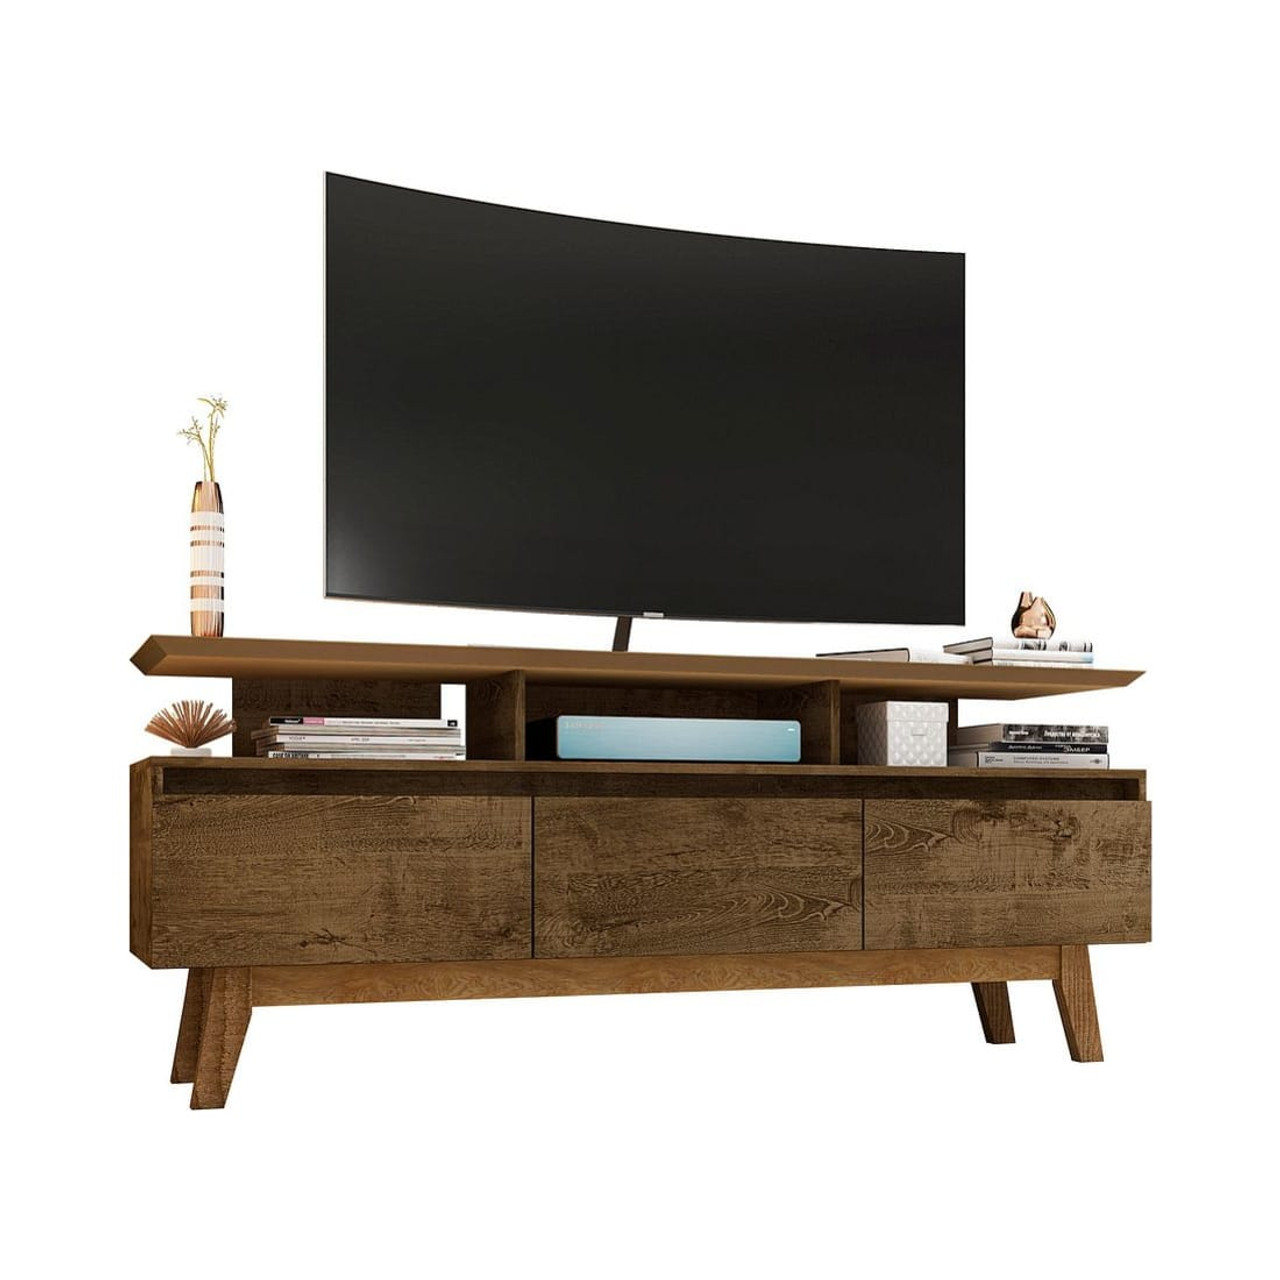 Yonkers 62.99” TV Stand in Rustic Brown